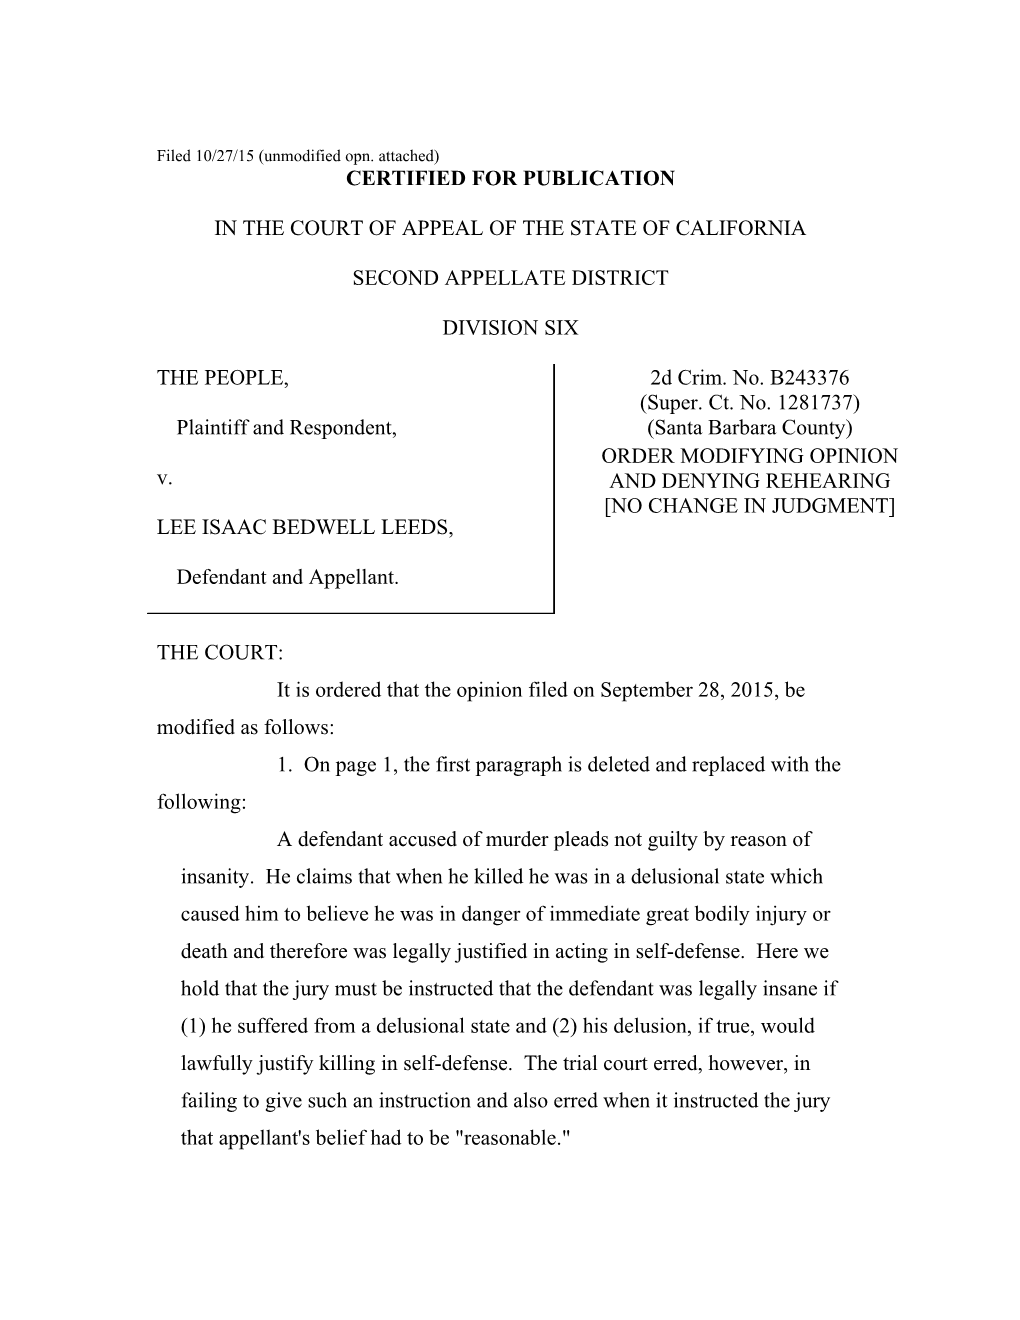 Filed 10/27/15 (Unmodified Opn. Attached)